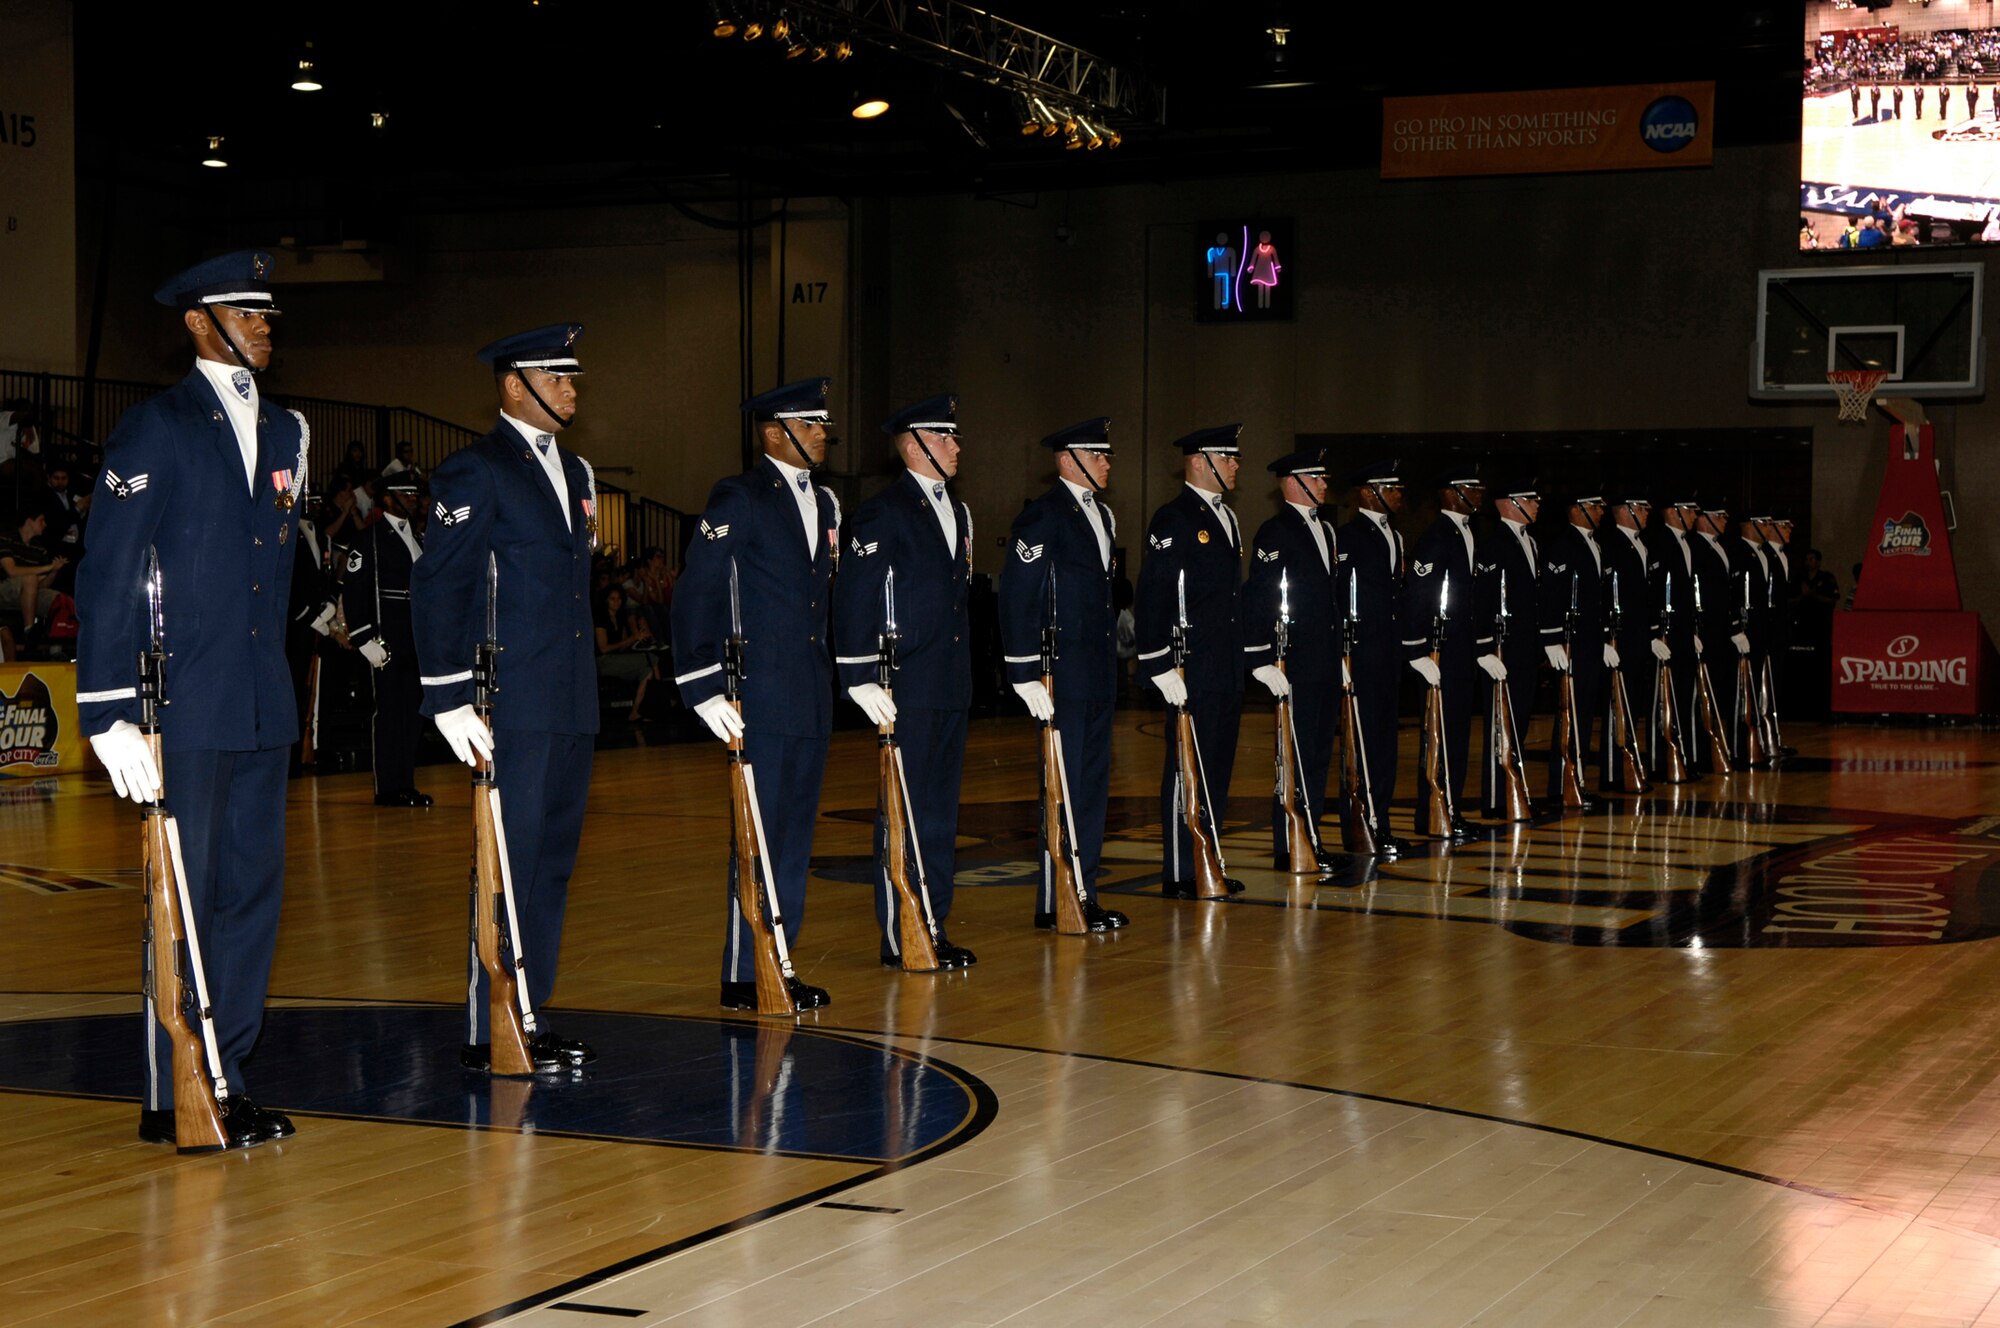 The Air Force Honor Guard Drill Team performs at the NCAA Men's Final Four events at the Hoop City Center Court. The Drill Team is the travelling component of the Air Force Honor Guard and tours worldwide showcasing the precision of today's Air Force, to recruit, retain and inspire Airmen for the Air Force mission. (U.S. Air Force photo by SSgt Raymond Mills)